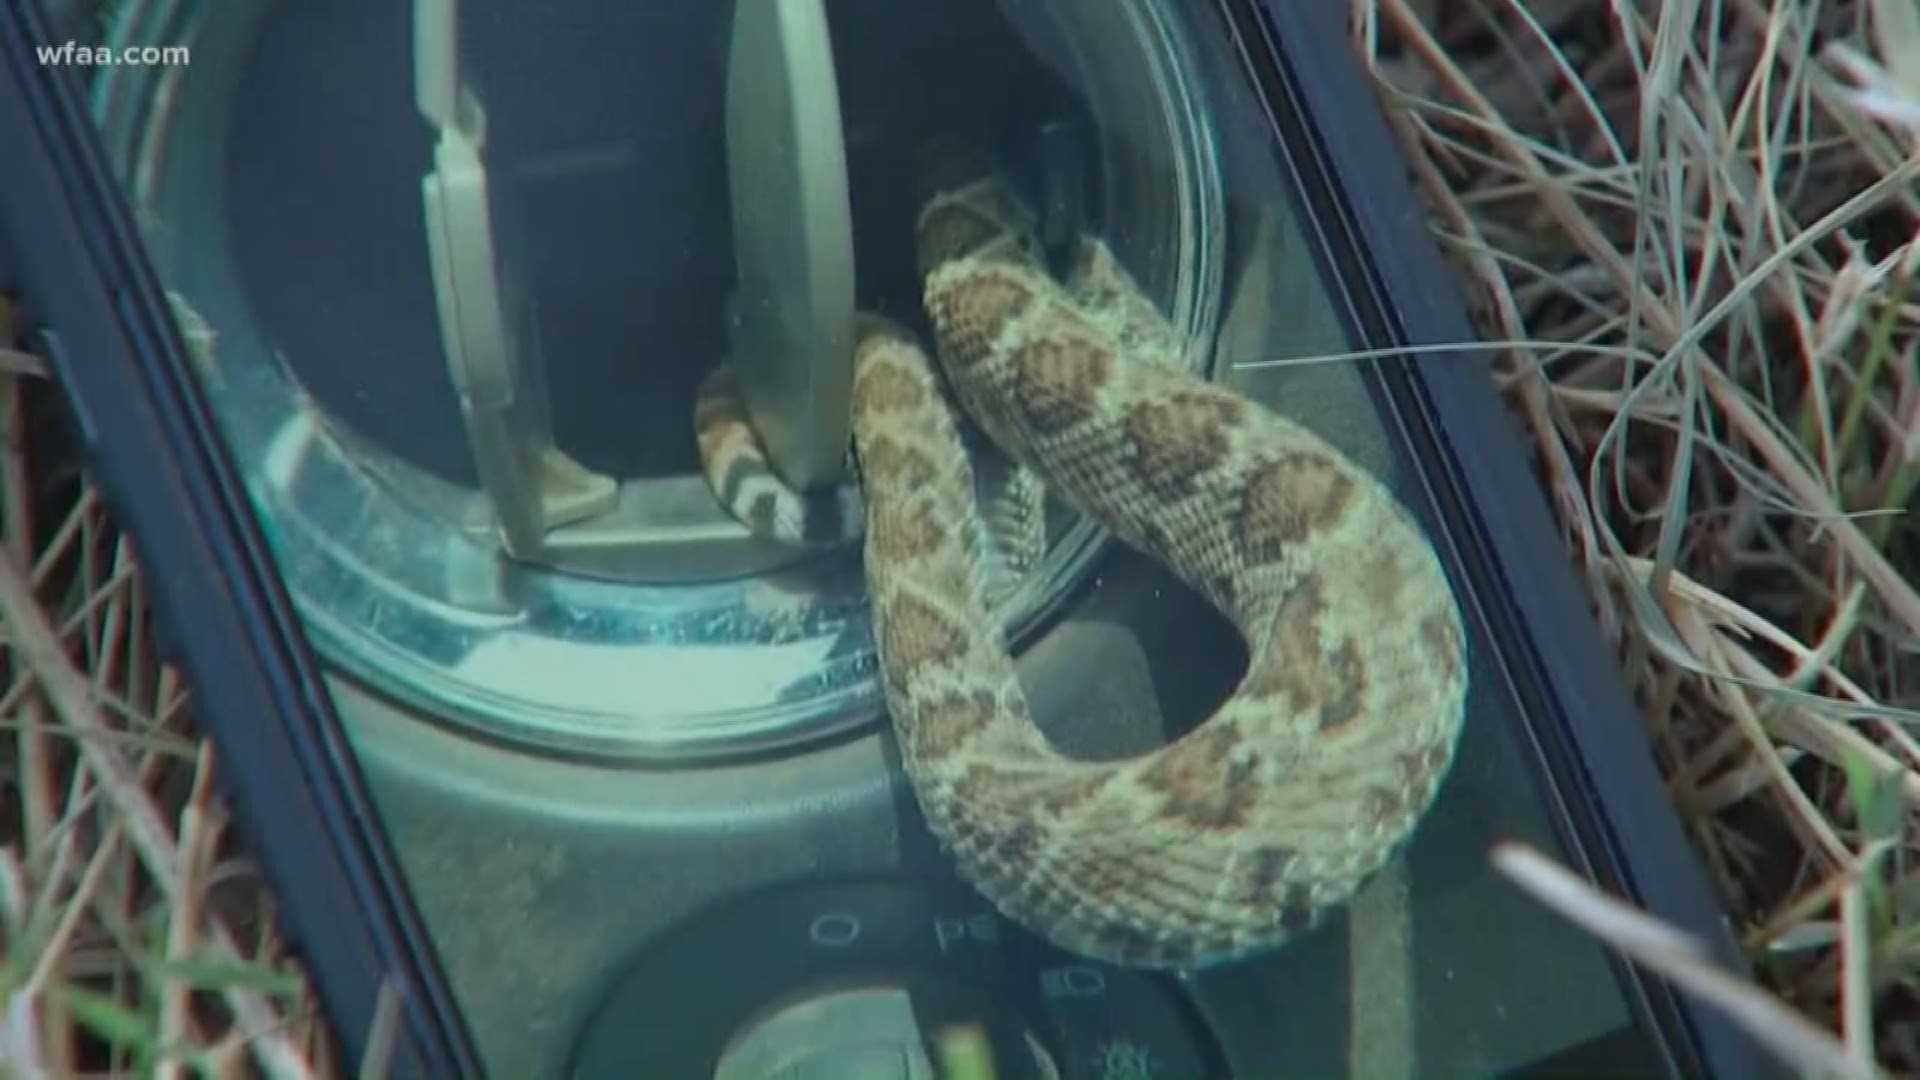 “Just another day in the pastures, ya know?” joked Bob Crowell of the discovery of a rattlesnake in his truck's air vent.